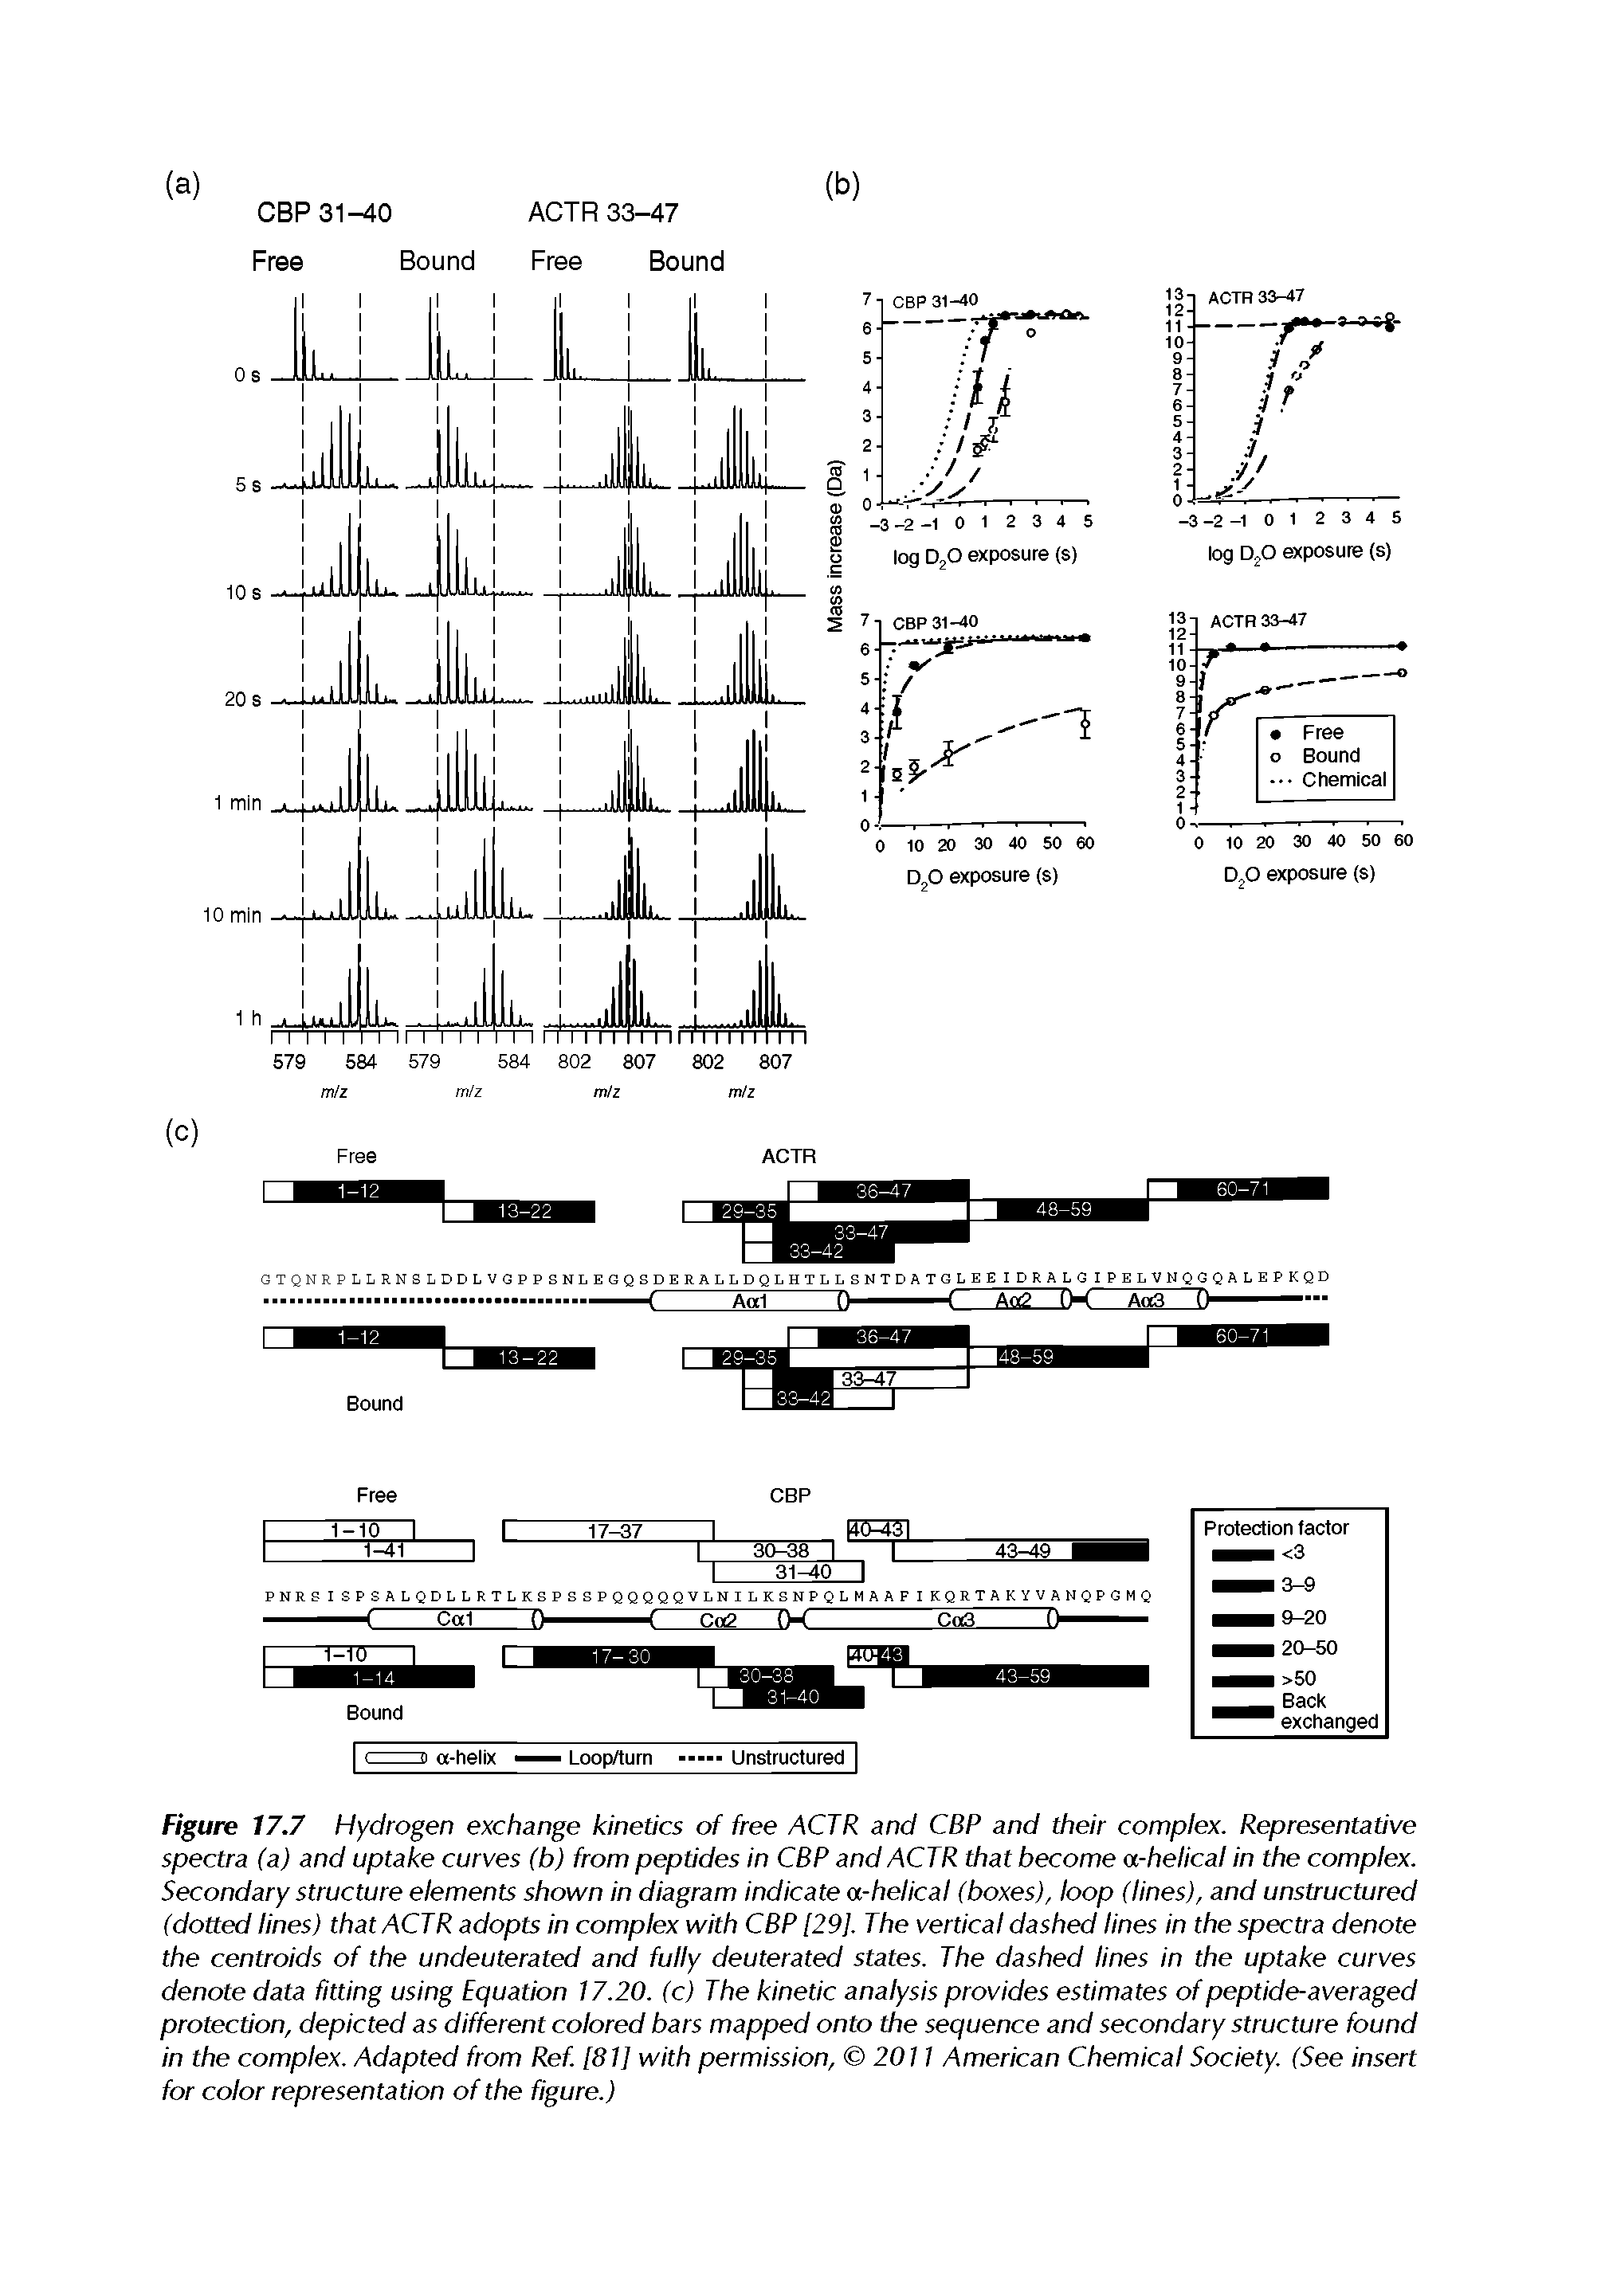 Figure 17.7 Hydrogen exchange kinetics of free ACTR and CBP and their complex. Representative spectra (a) and uptake curves (b) from peptides in CBP and ACTR that become a-helical in the complex. Secondary structure elements shown In diagram indicate a-helical (boxes), loop (lines), and unstructured (dotted lines) that ACTR adopts in complex with CBP [29]. The vertical dashed lines in the spectra denote the centroids of the undeuterated and fully deuterated states. The dashed lines in the uptake curves denote data fitting using Equation 17.20. (c) The kinetic analysis provides estimates of peptide-averaged protection, depicted as different colored bars mapped onto the sequence and secondary structure found in the complex. Adapted from Ref [81] with permission, 2011 American Chemical Society. (See insert for color representation of the figure.)...